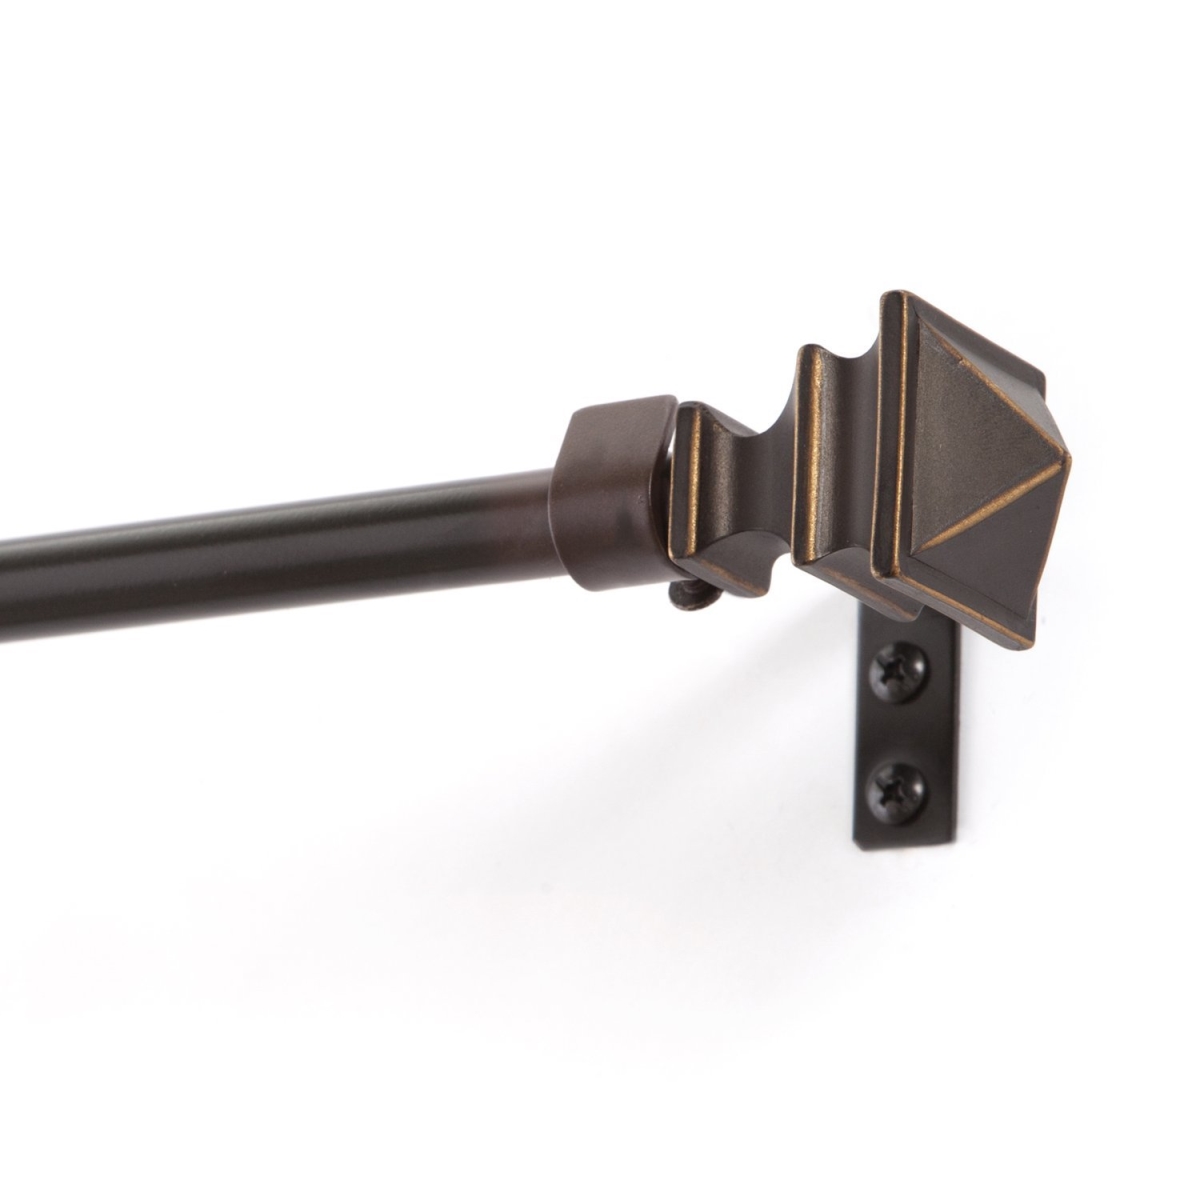 32-lwf1005-3orb 88-144 In. Painted Oil Rubbed Bronze Finish Single Rod Window Hardware With Knob Resin Finial